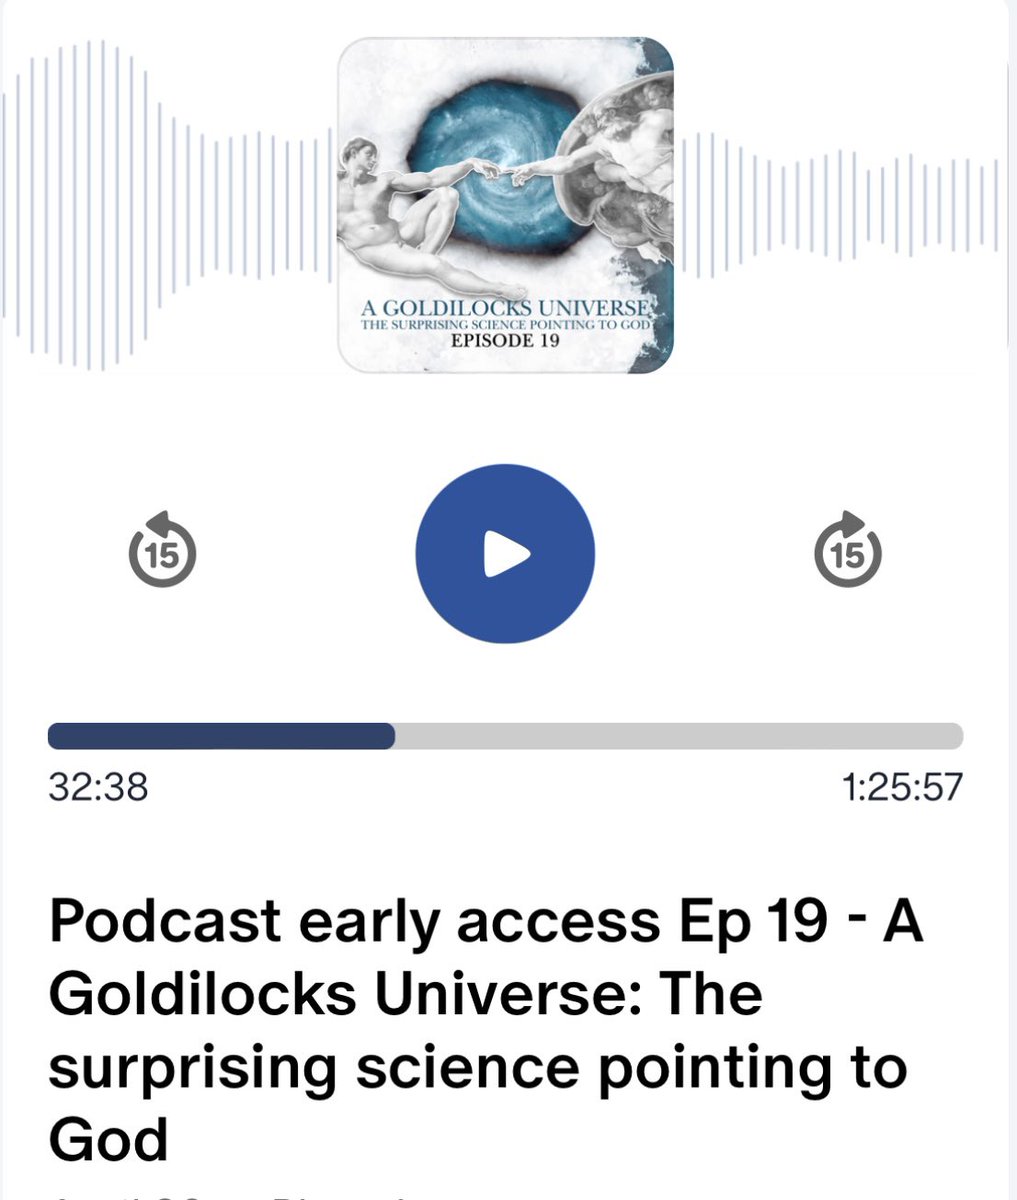 A Goldilocks Universe. You won’t want to miss the NEXT episode 19 of the Surprising Rebirth pod. I explore recent revelations in science opening up the God question. *BUT* you can listen NOW when you become a Silver or Gold supporter ☺️ Available now when you support on…